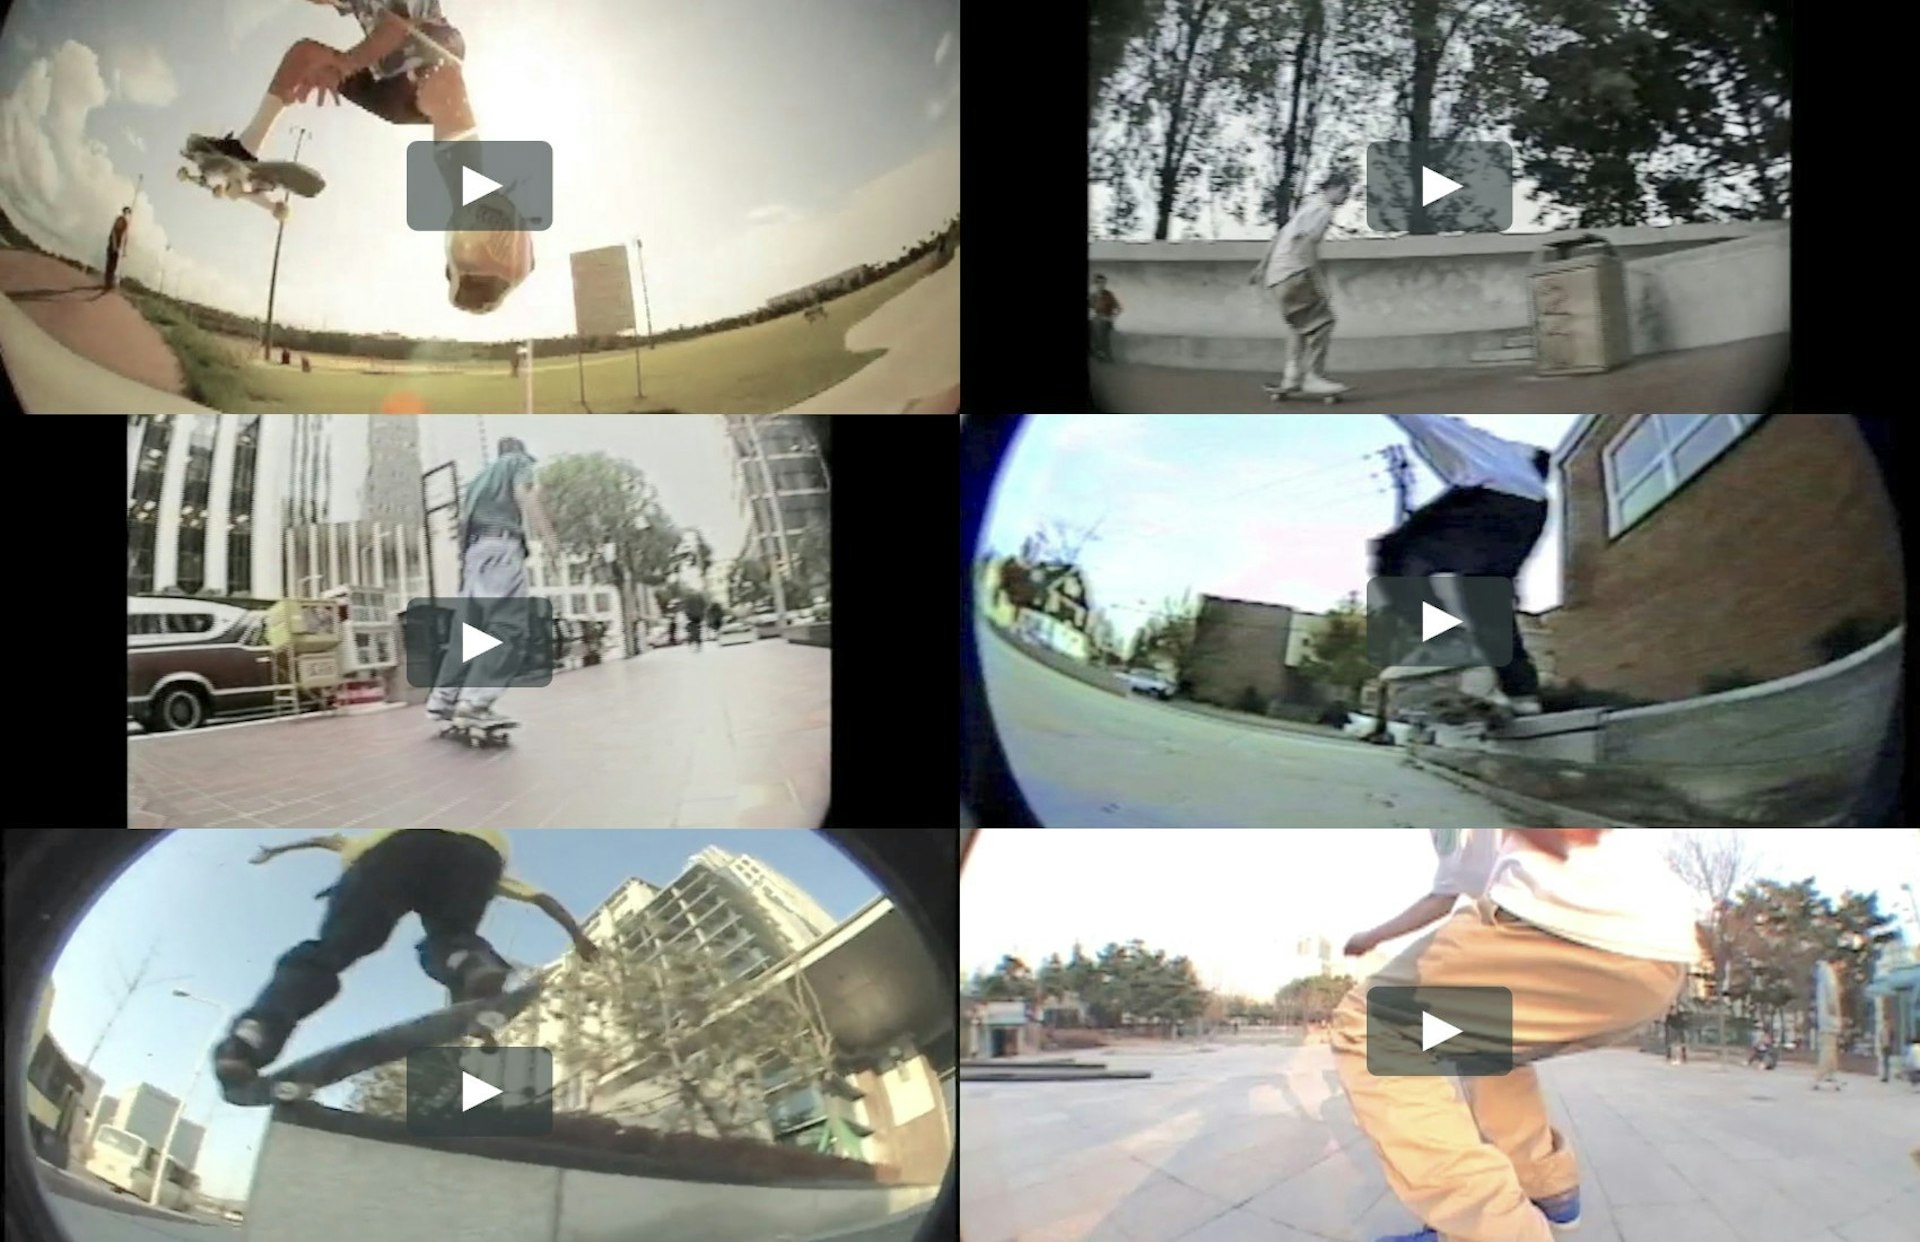 Old skate videos are getting me through the pandemic